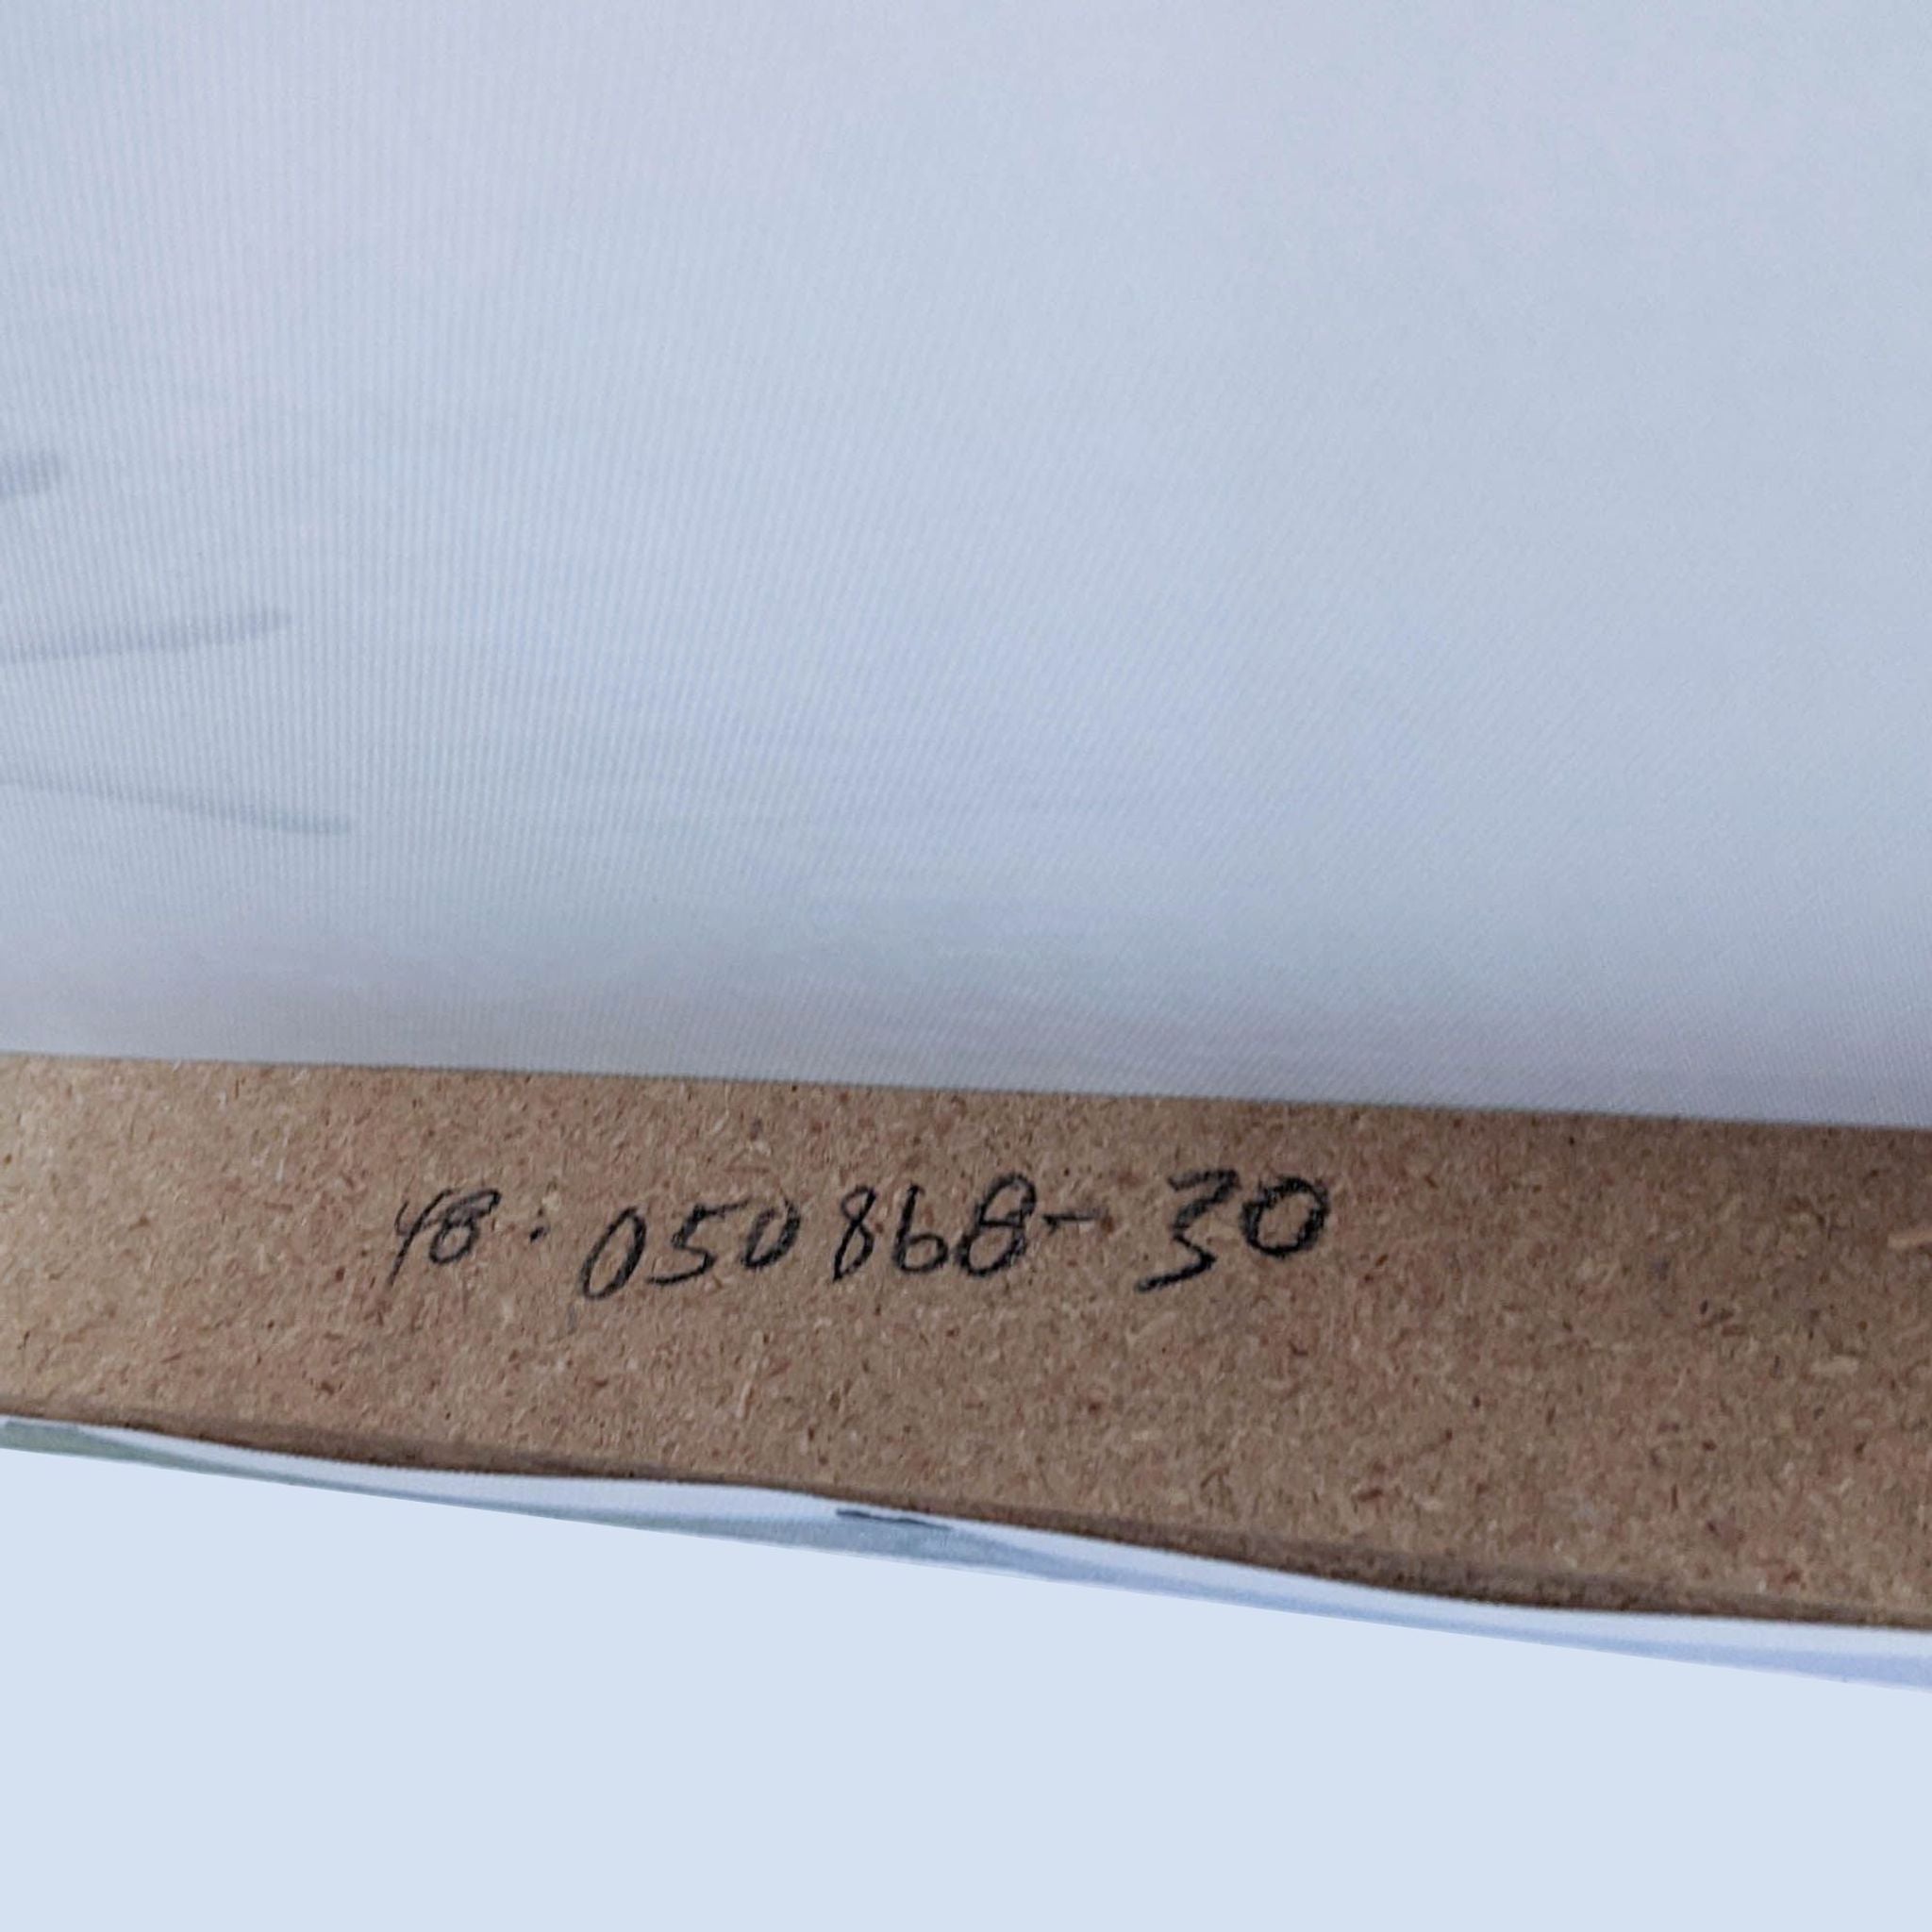 Close-up of a handwritten code on the back of a canvas print by Reperch with soft blue tones, likely indicating edition or inventory number.